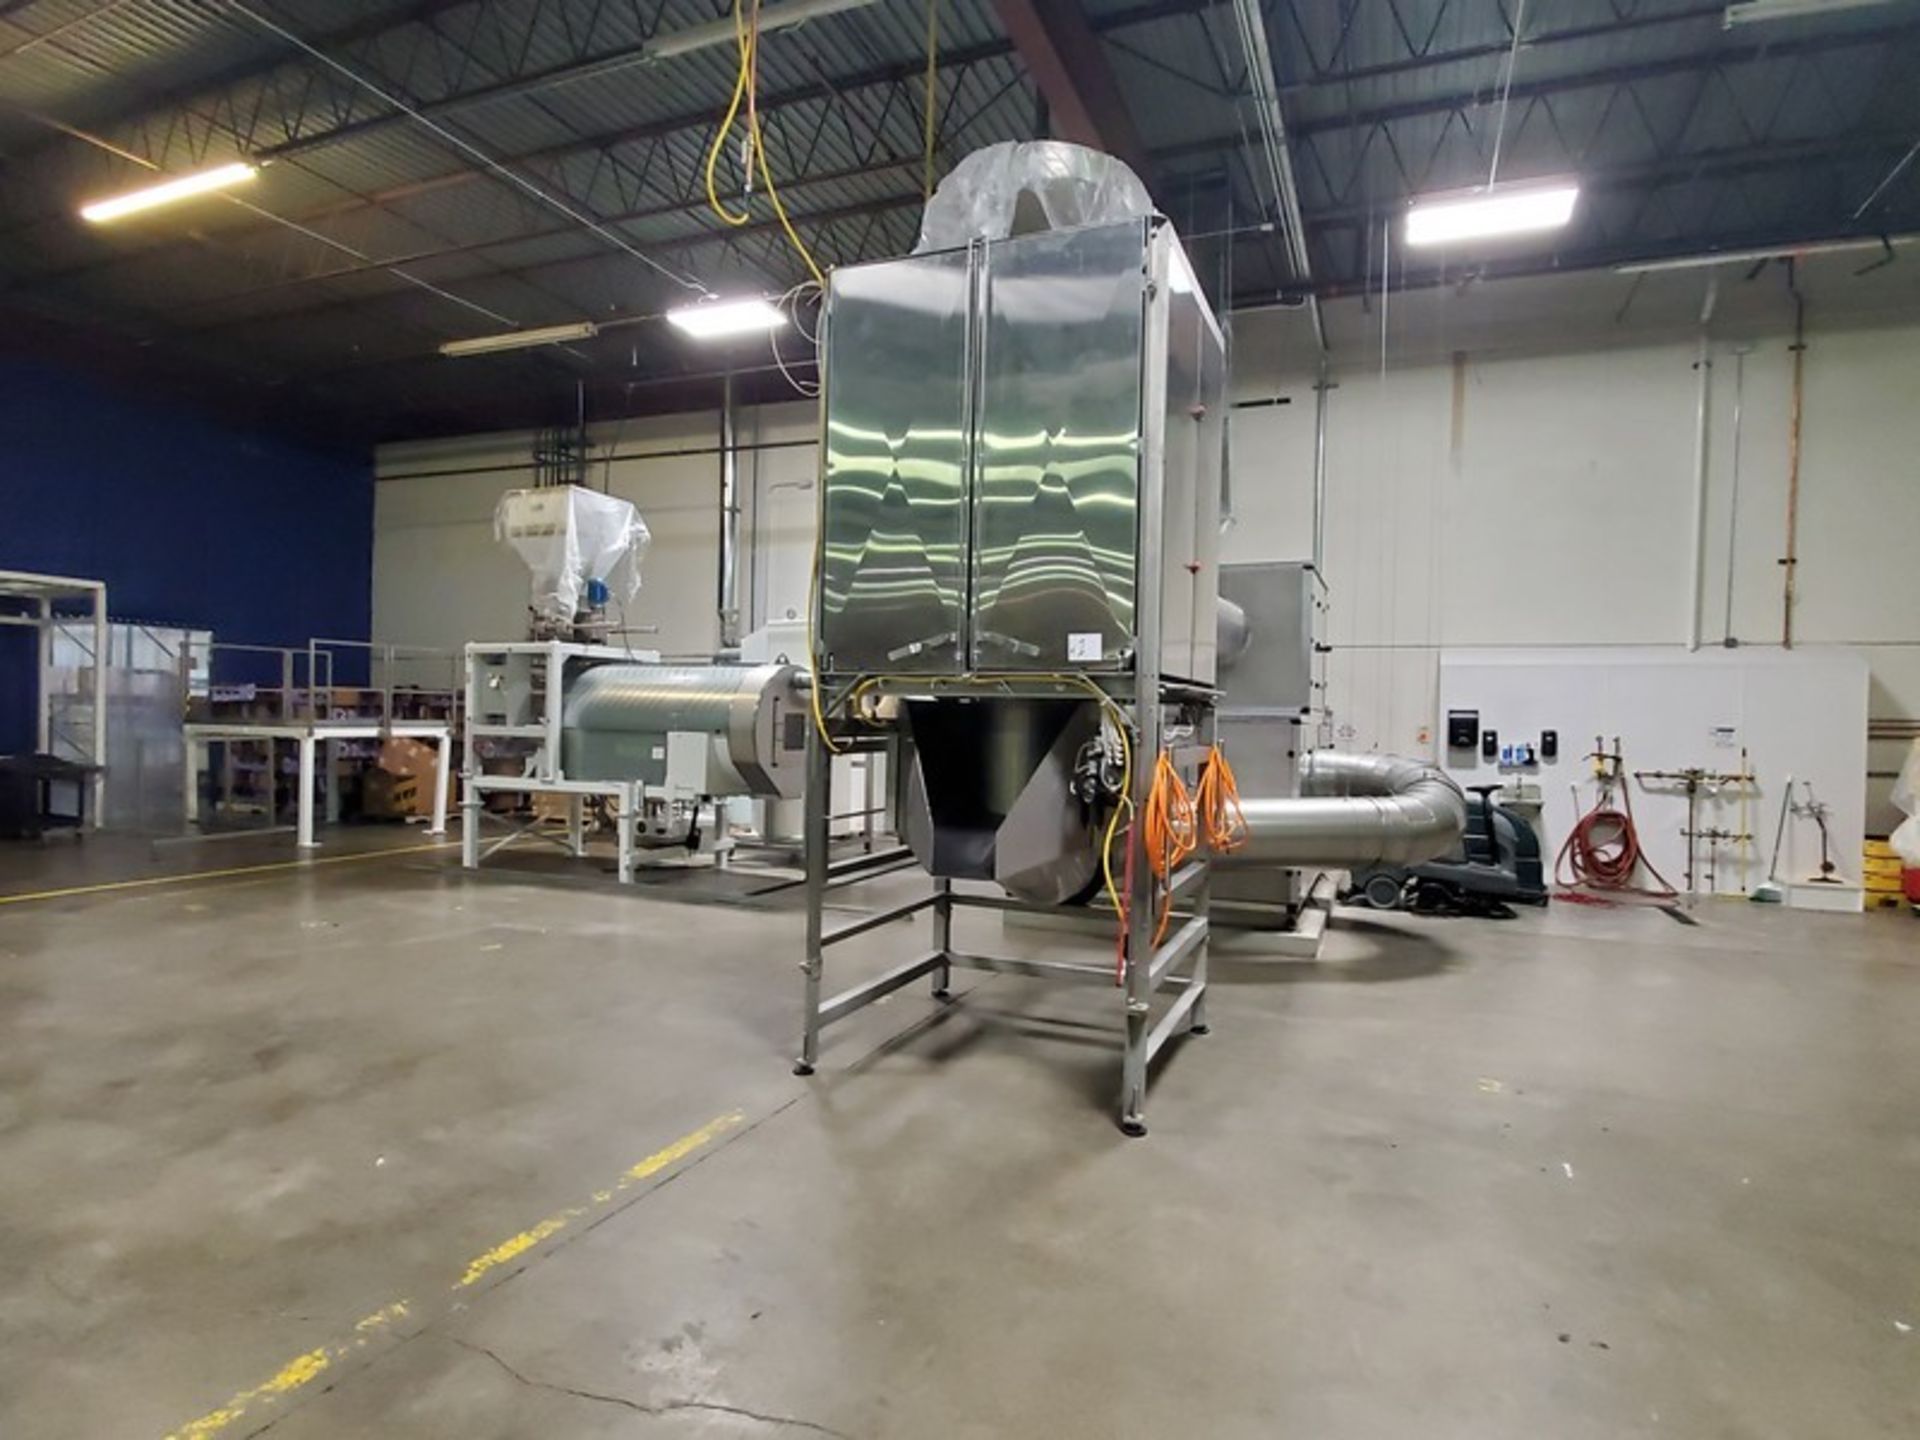 2018 Neo-Pure Seed, Nut, Grain & Hemp Pasteurizing and Drying System, - Image 81 of 108